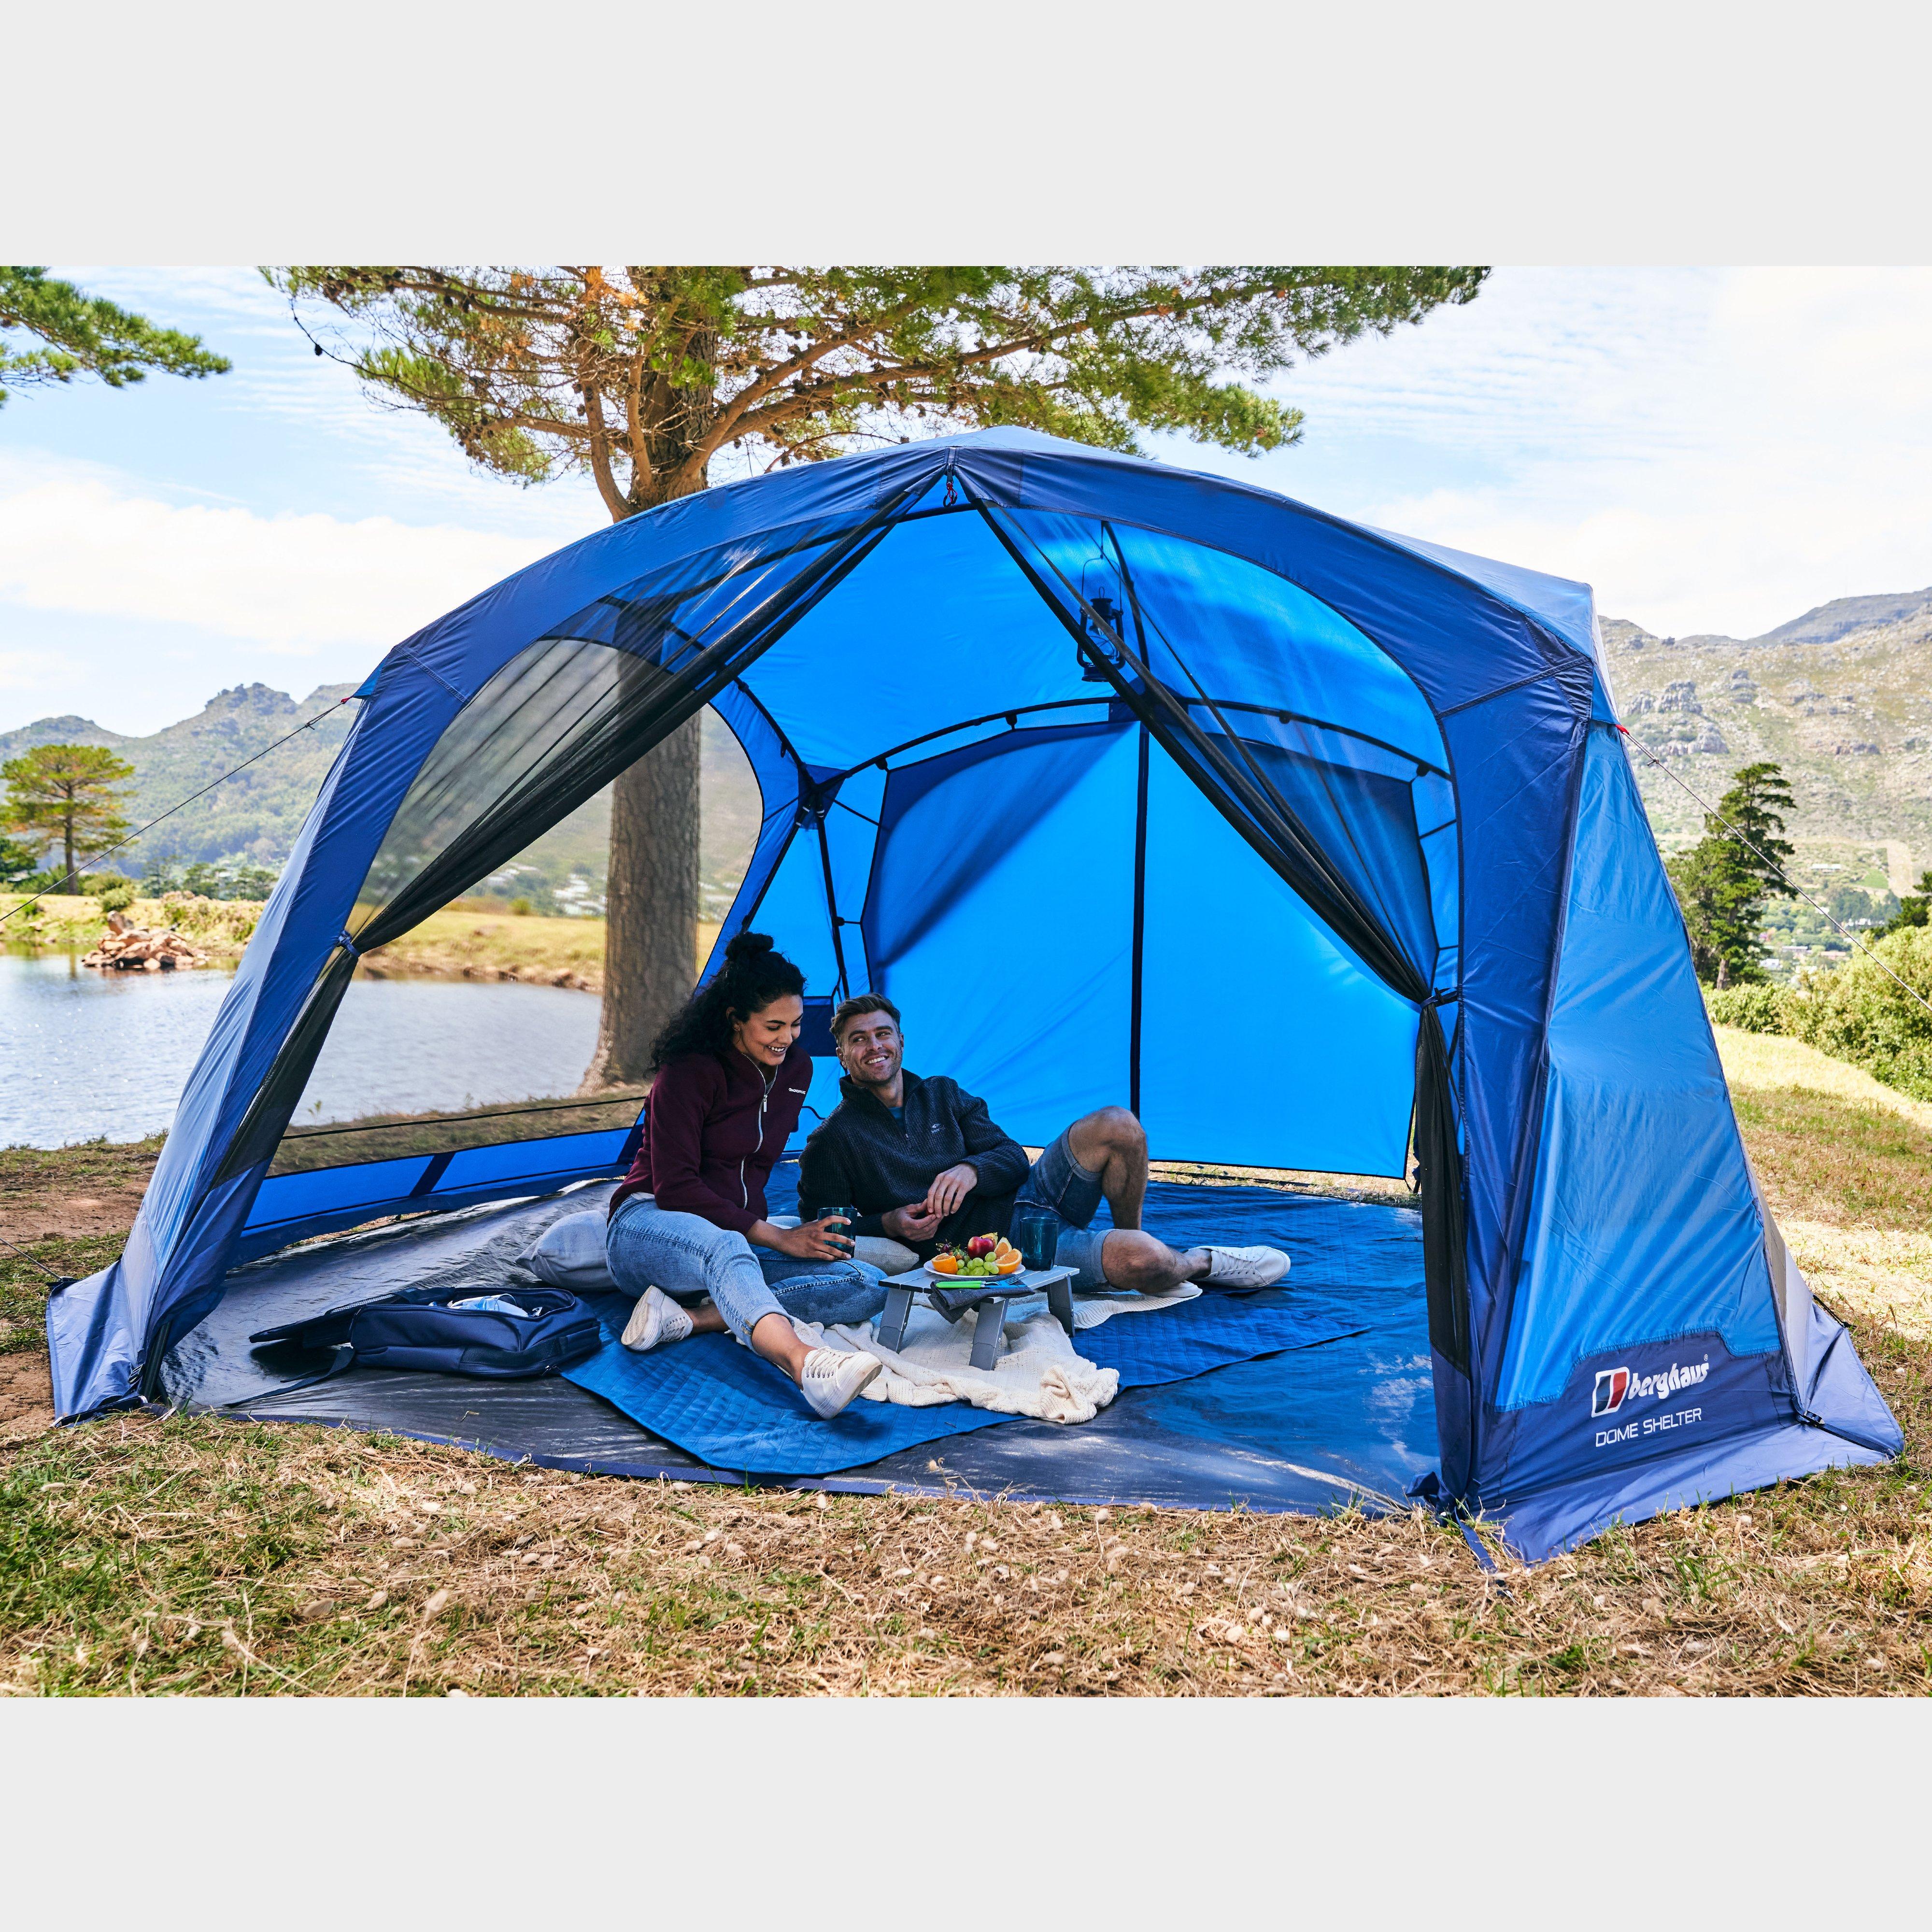  Berghaus Dome Shelter Walls and Doors set, Blue